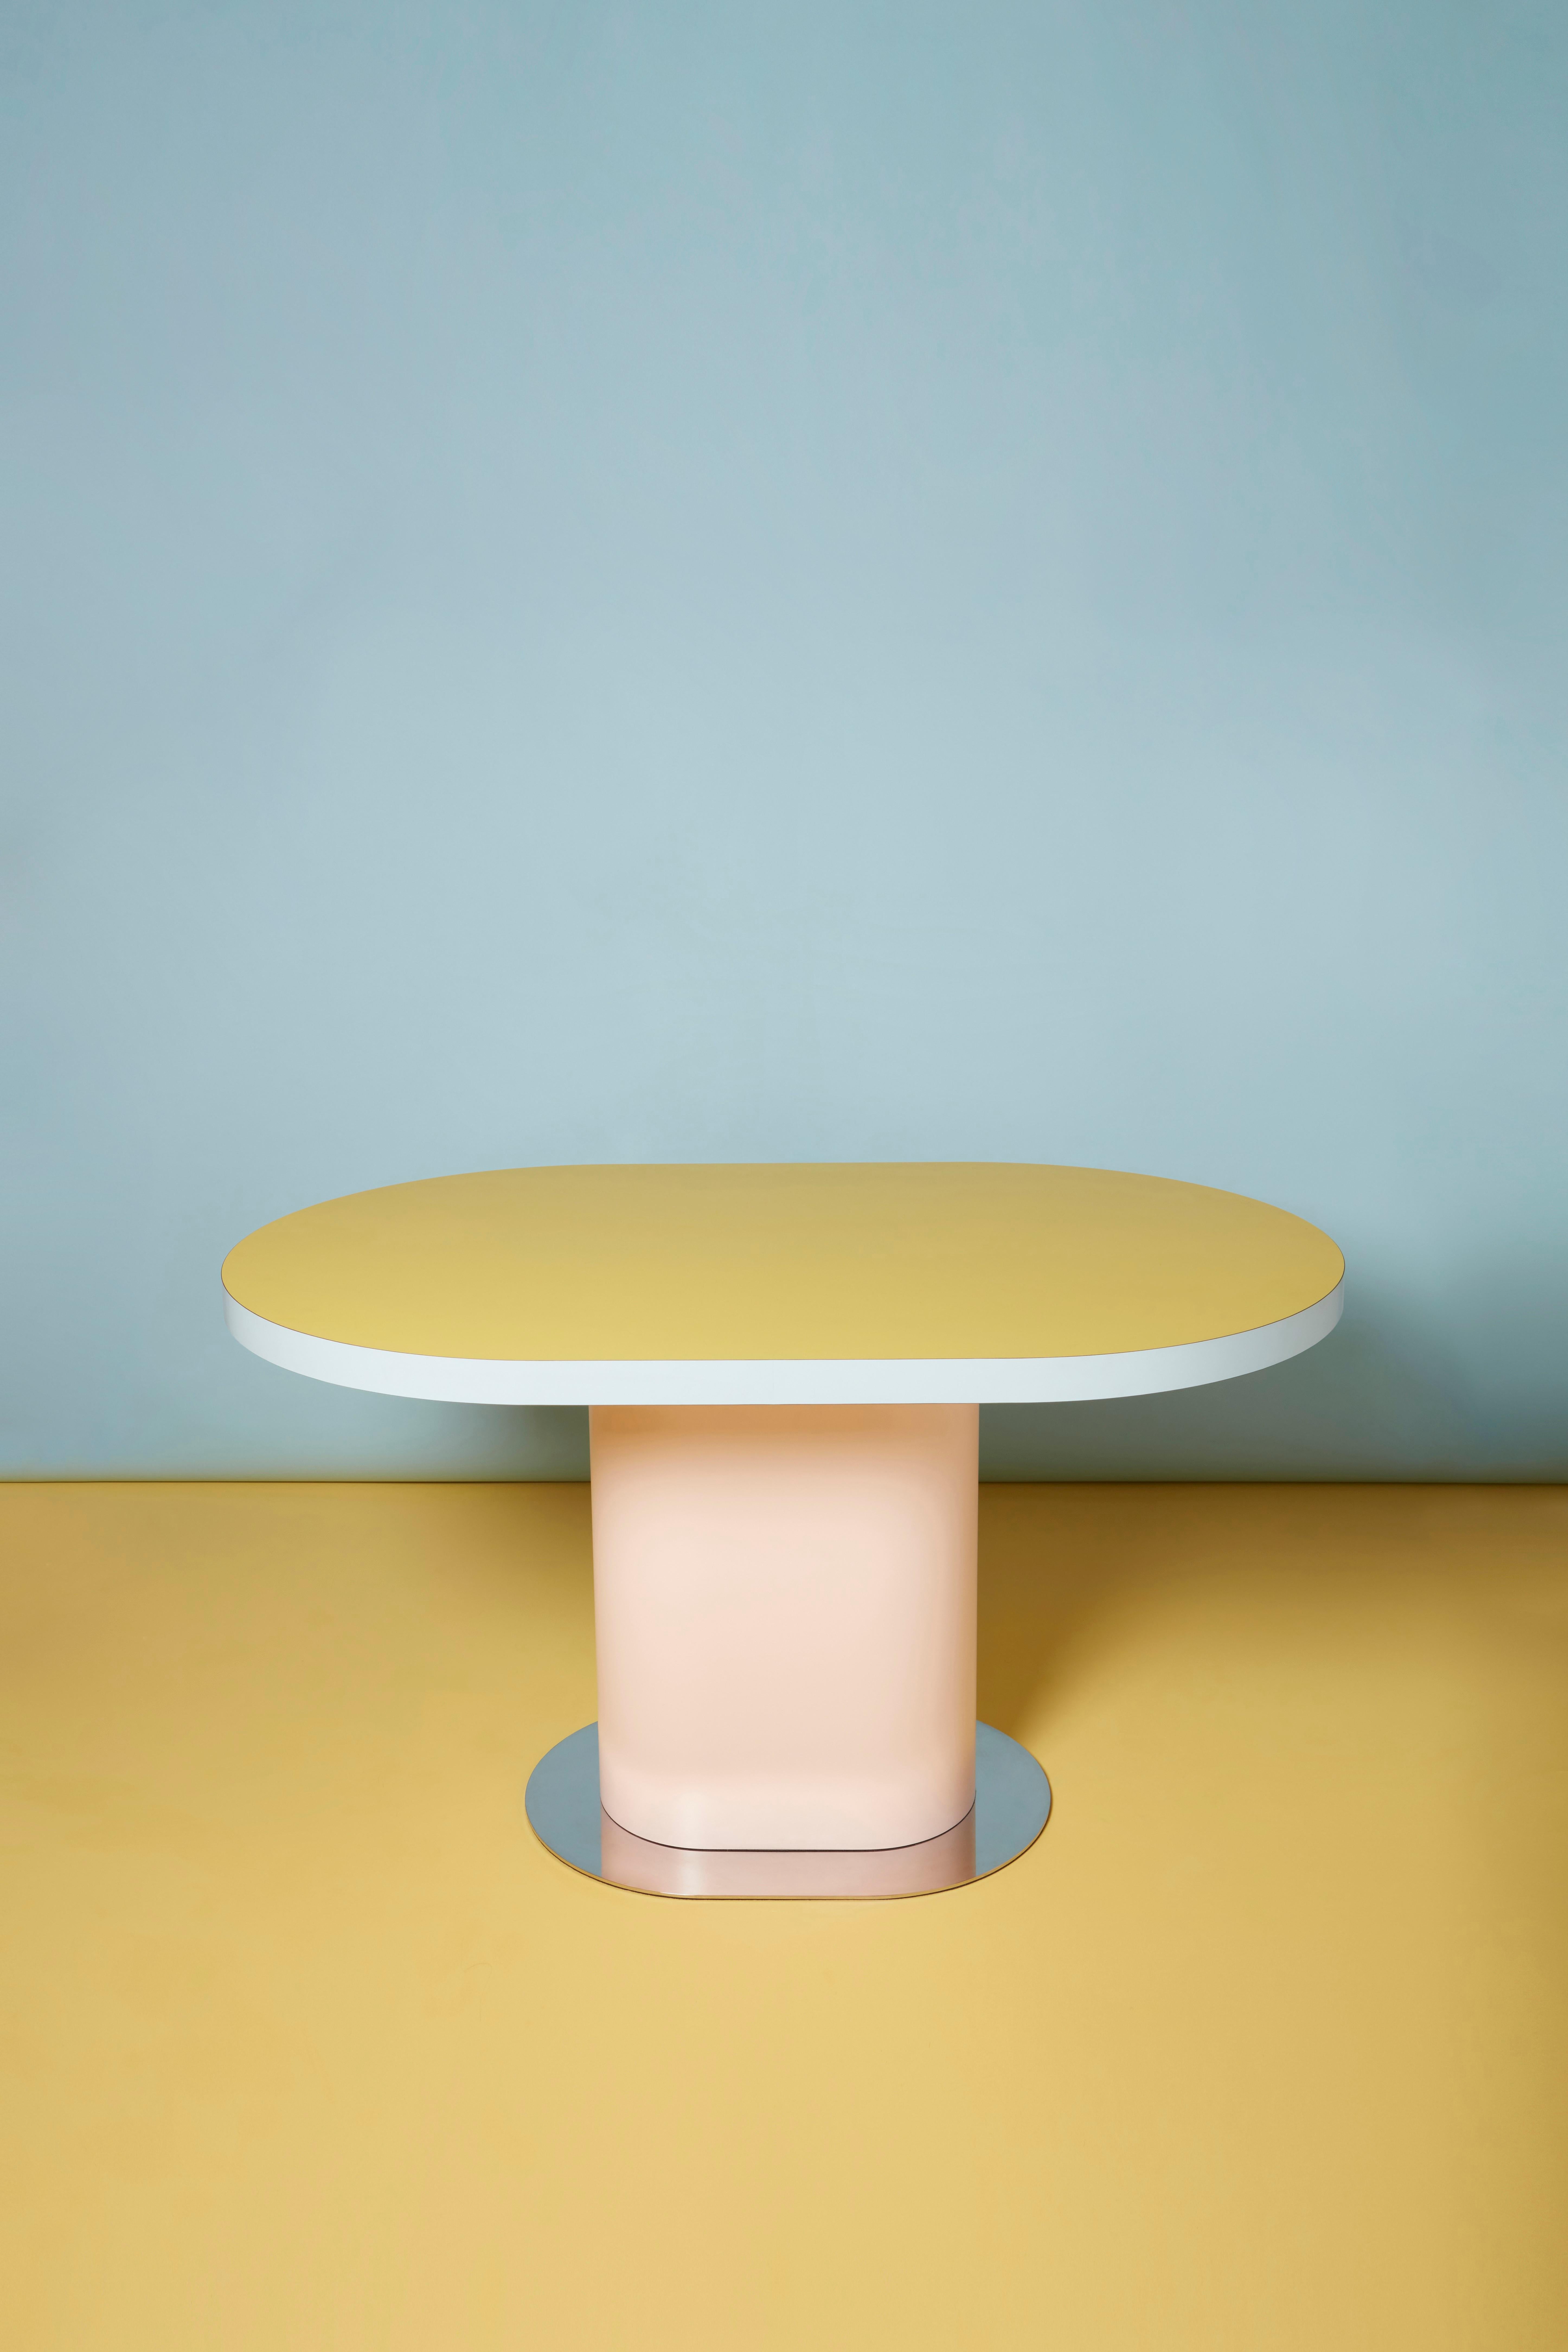 Stainless Steel TAGADA´ Oval Table by Stamuli, Yellow, Pink, Light Blue For Sale